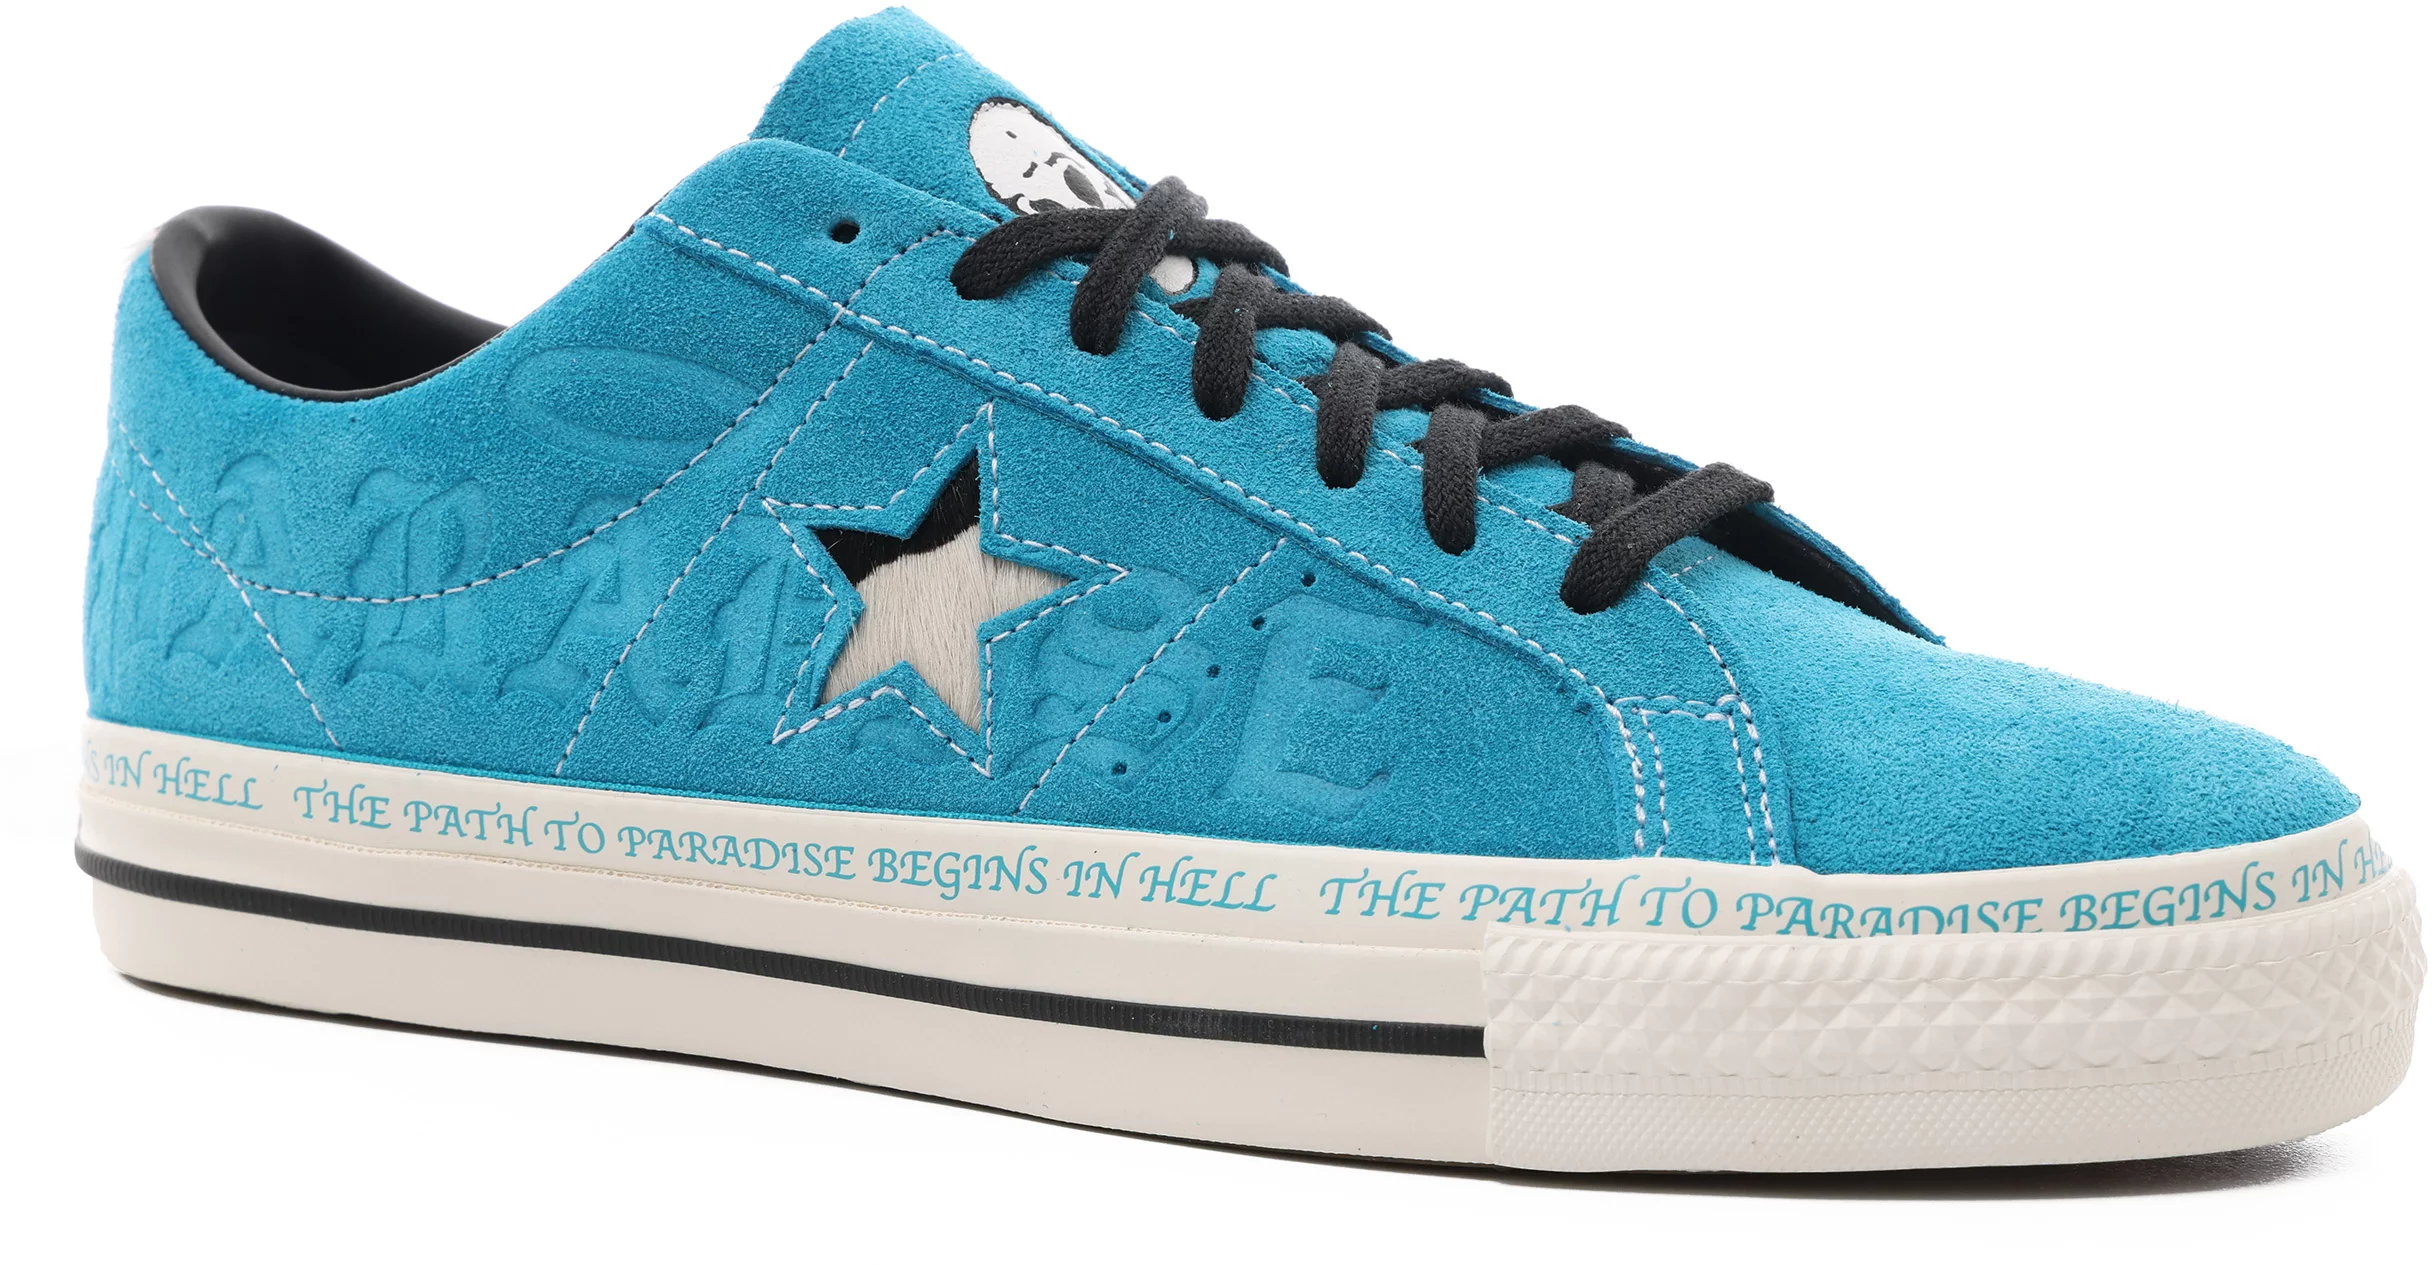 Converse One Star Pro Skate Shoes - (sean pablo) rapid teal/black/egret -  Free Shipping | Tactics